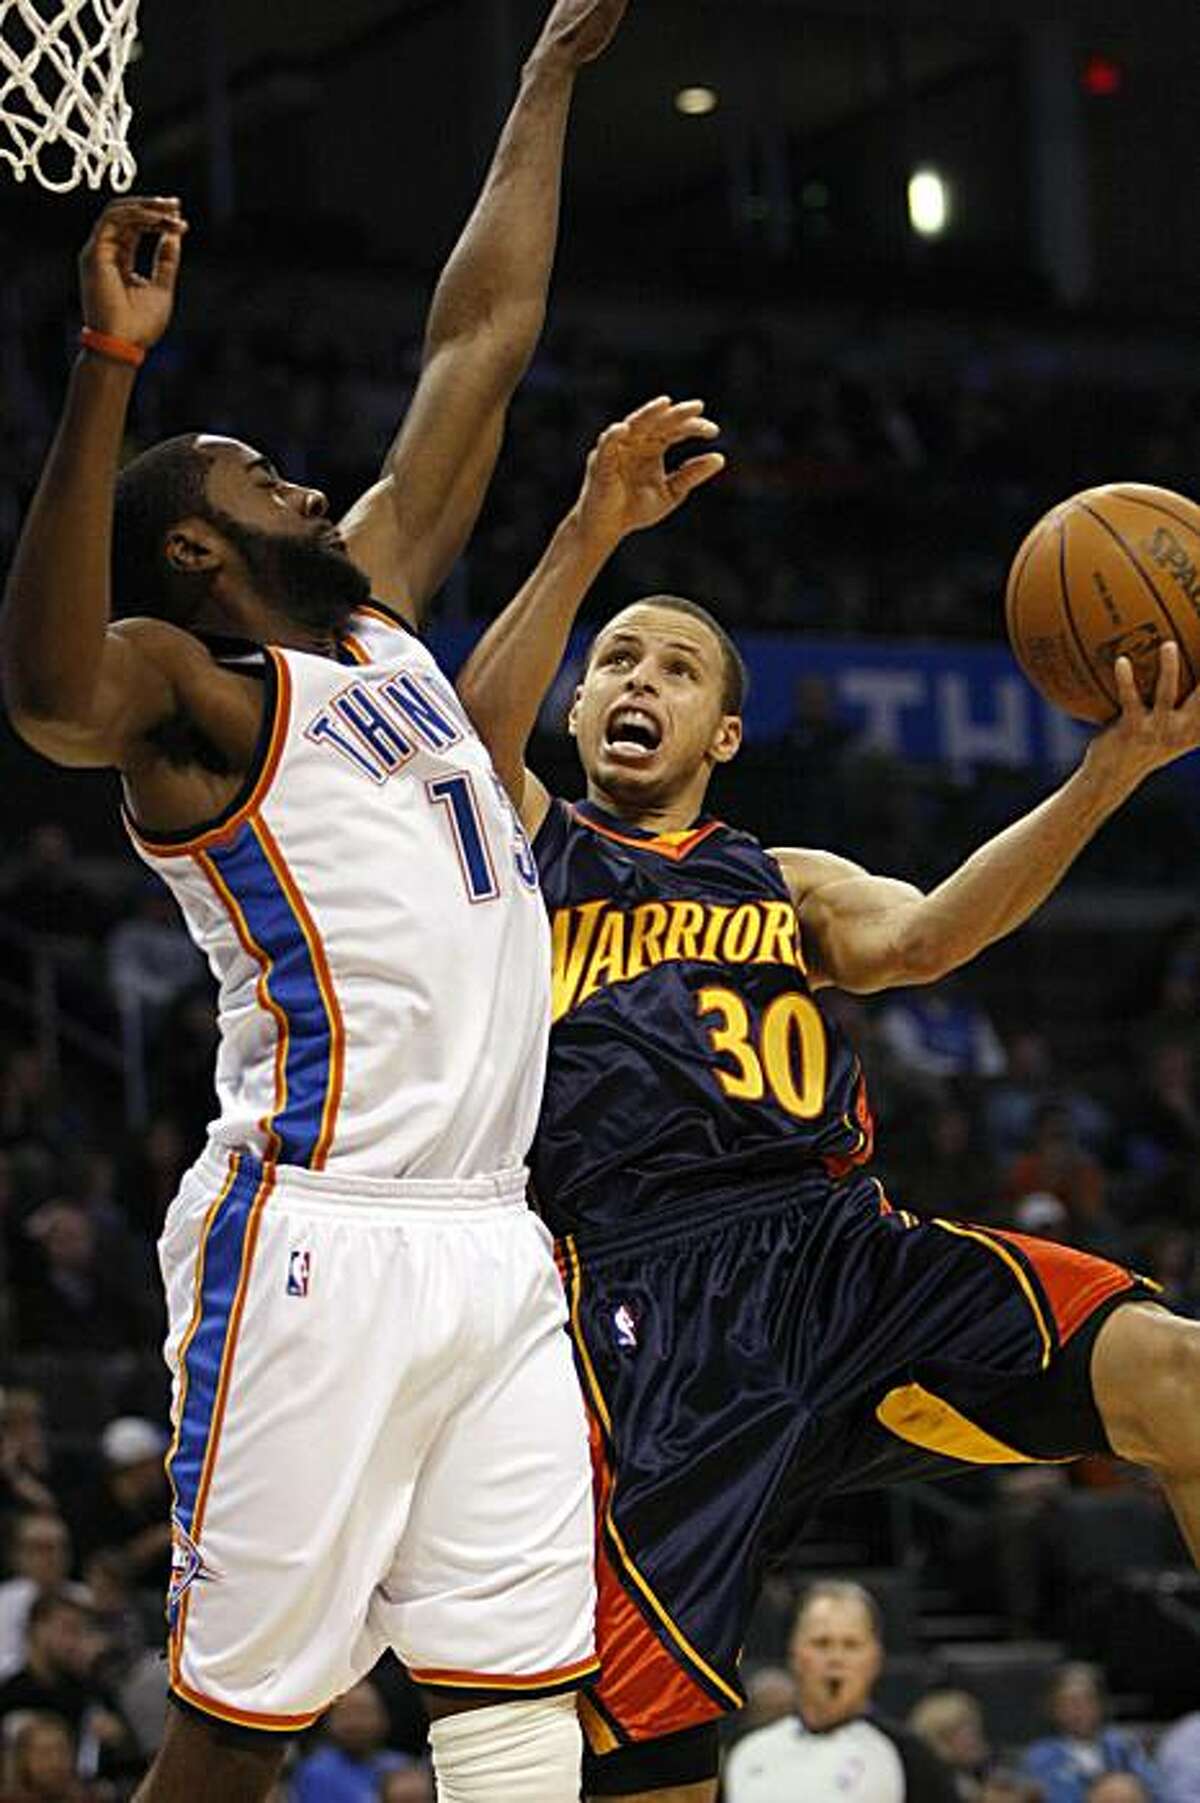 Golden State Warriors guard Stephen Curry goes up for a shot as Oklahoma City Thunder's James Harden defends in the first half in Oklahoma City on Monday.